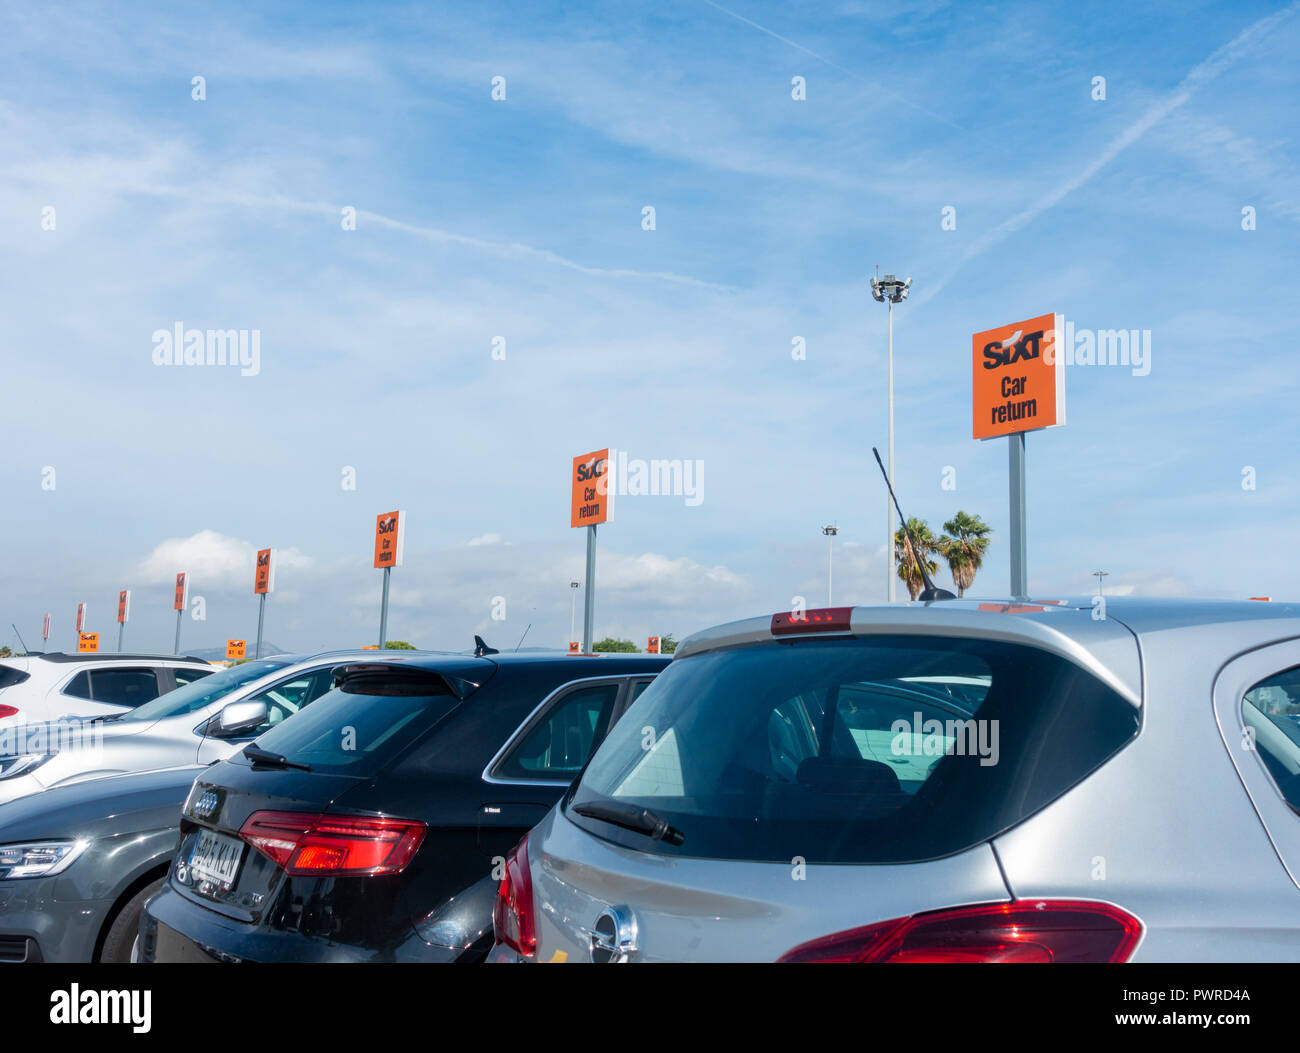 Sixt car hire compound at Barcelona airport. Spain Stock Photo